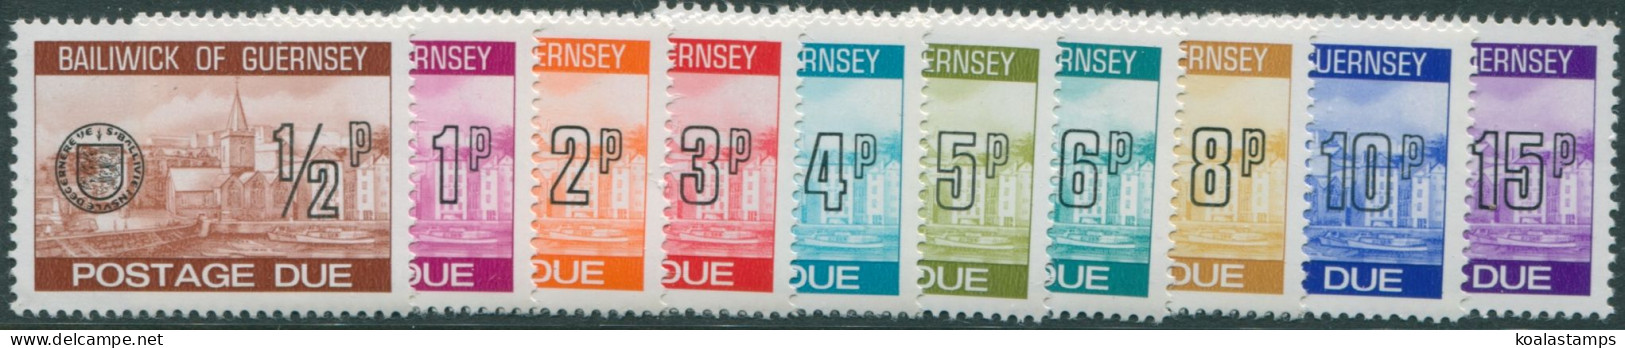 Guernsey Due 1977 SGD18-D28 Views Postage Due (10) MNH - Guernesey